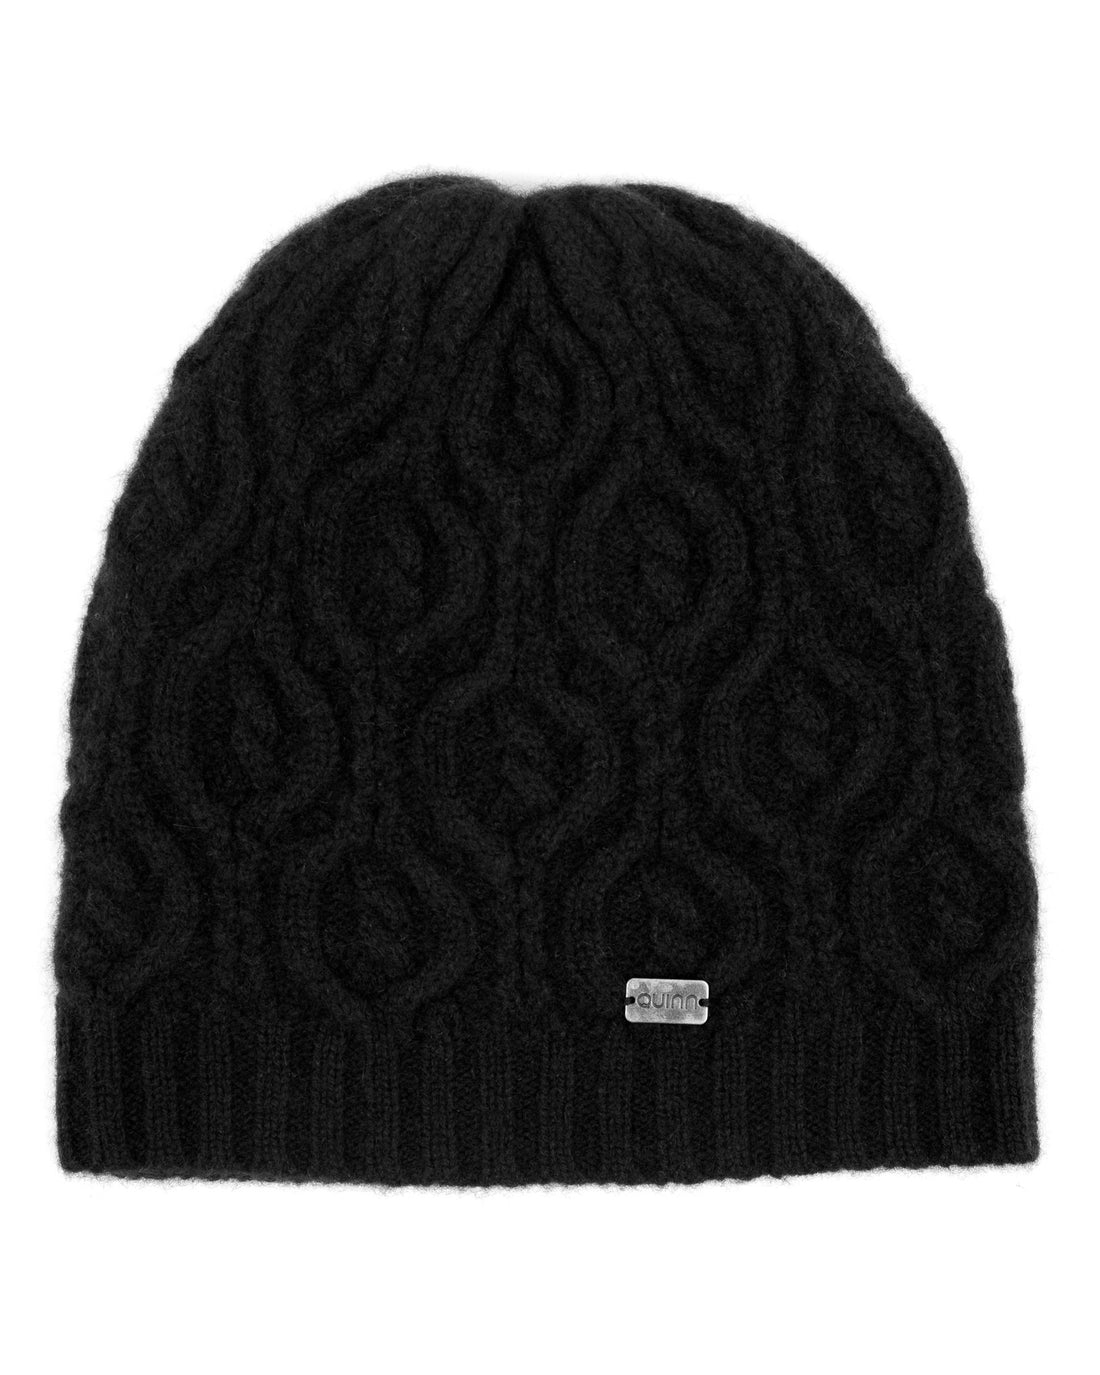 cashmere peacock cable knit hat